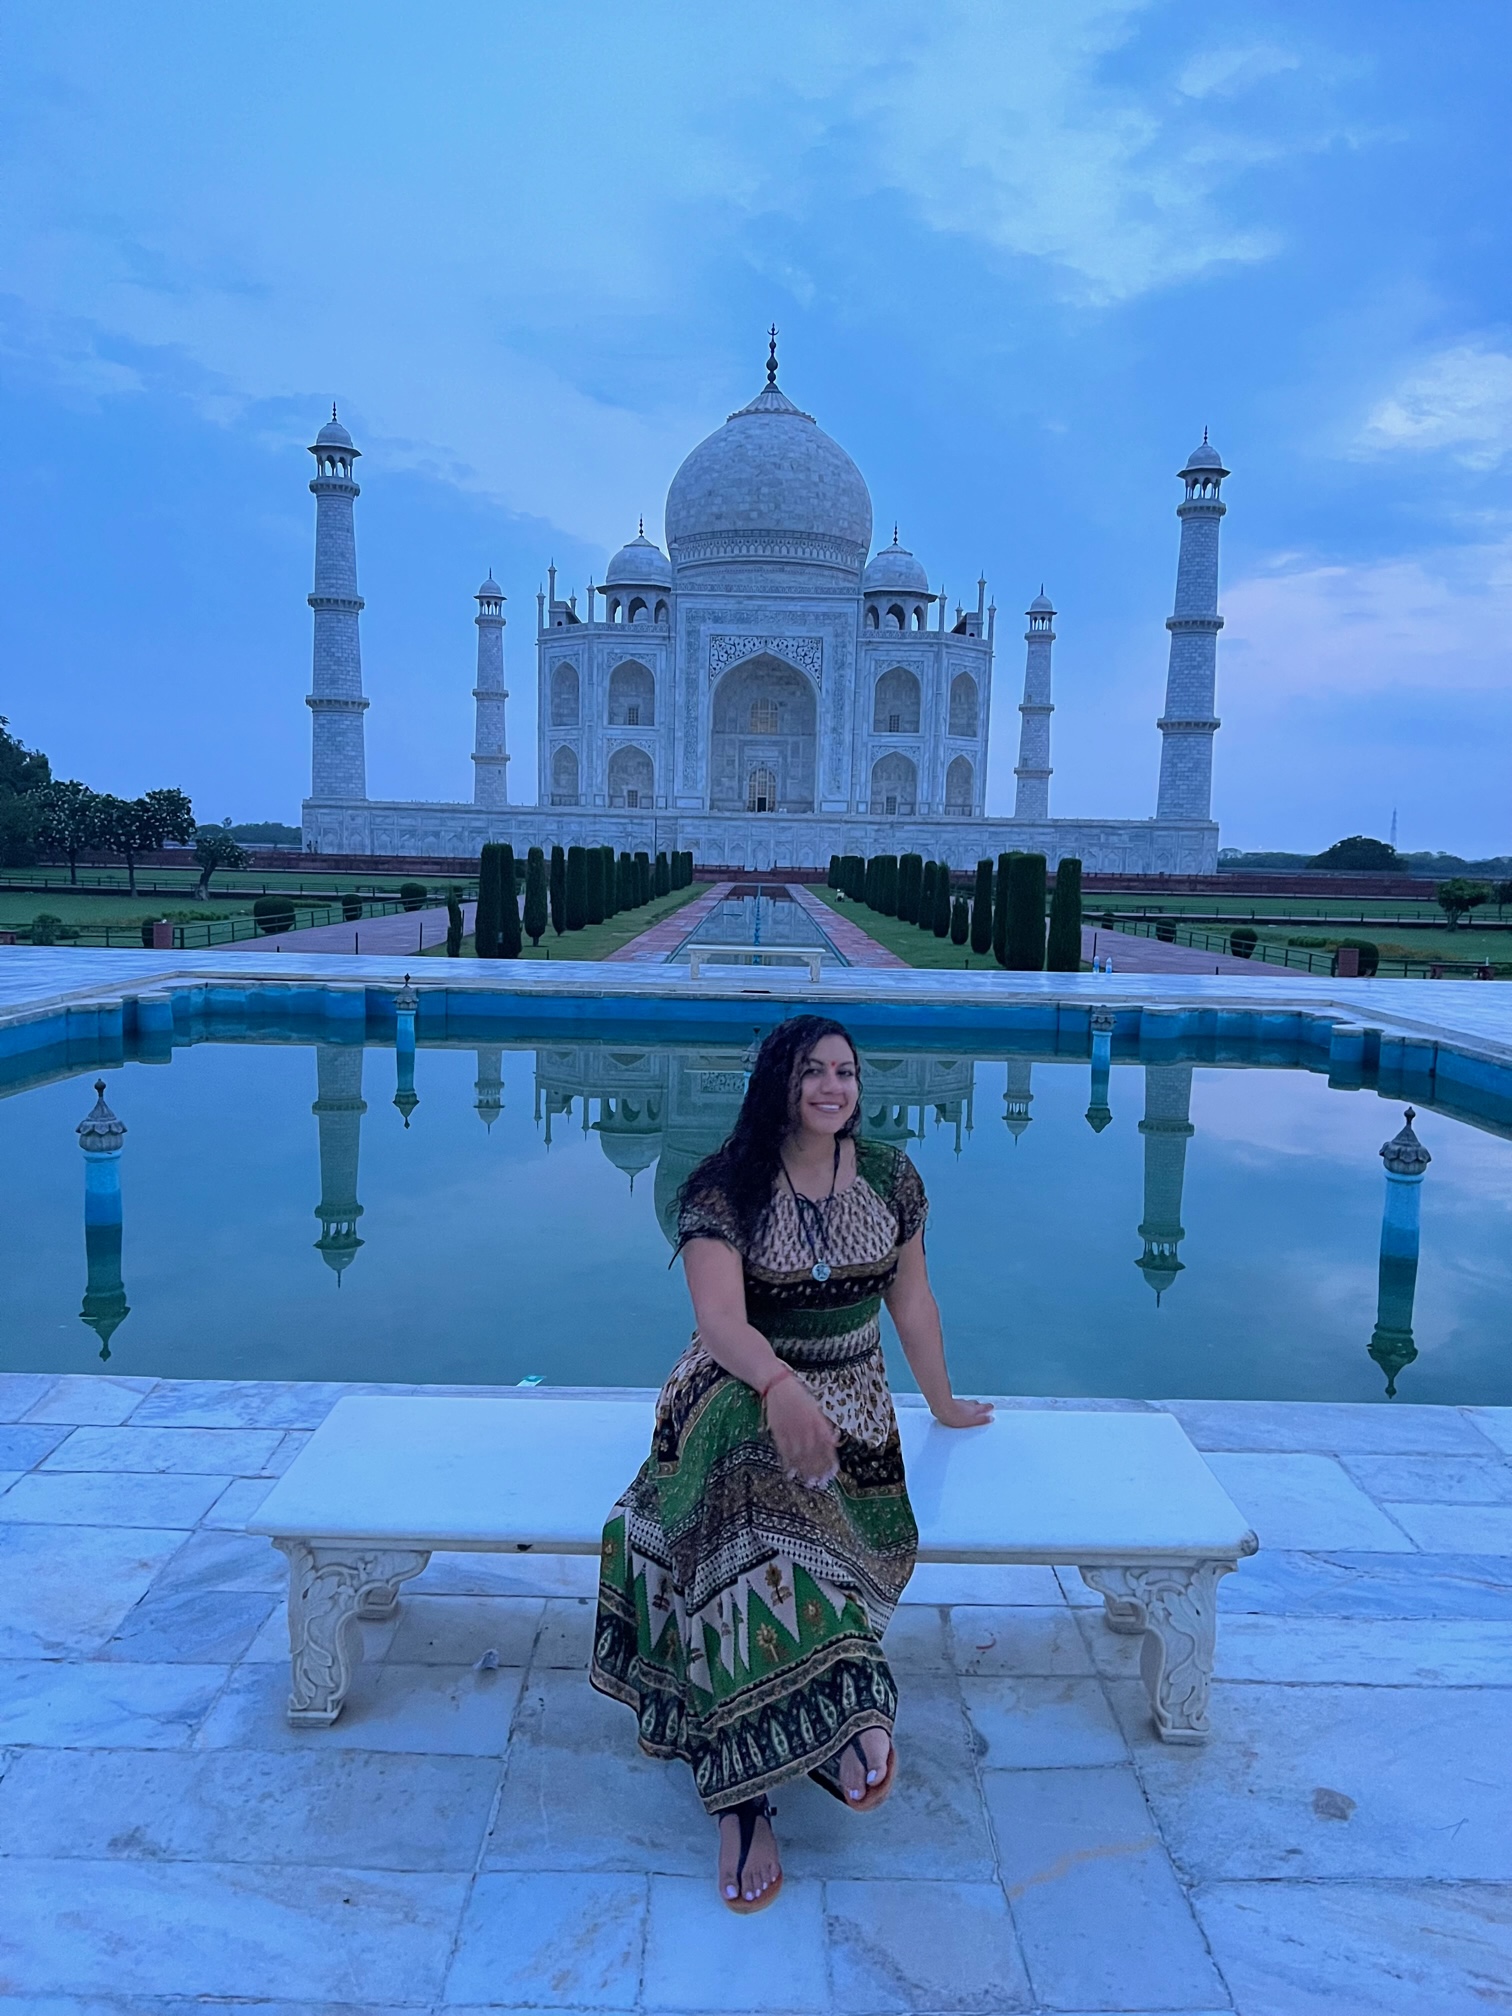 The Taj Mahal, India - History, Location, & Pictures From Agra